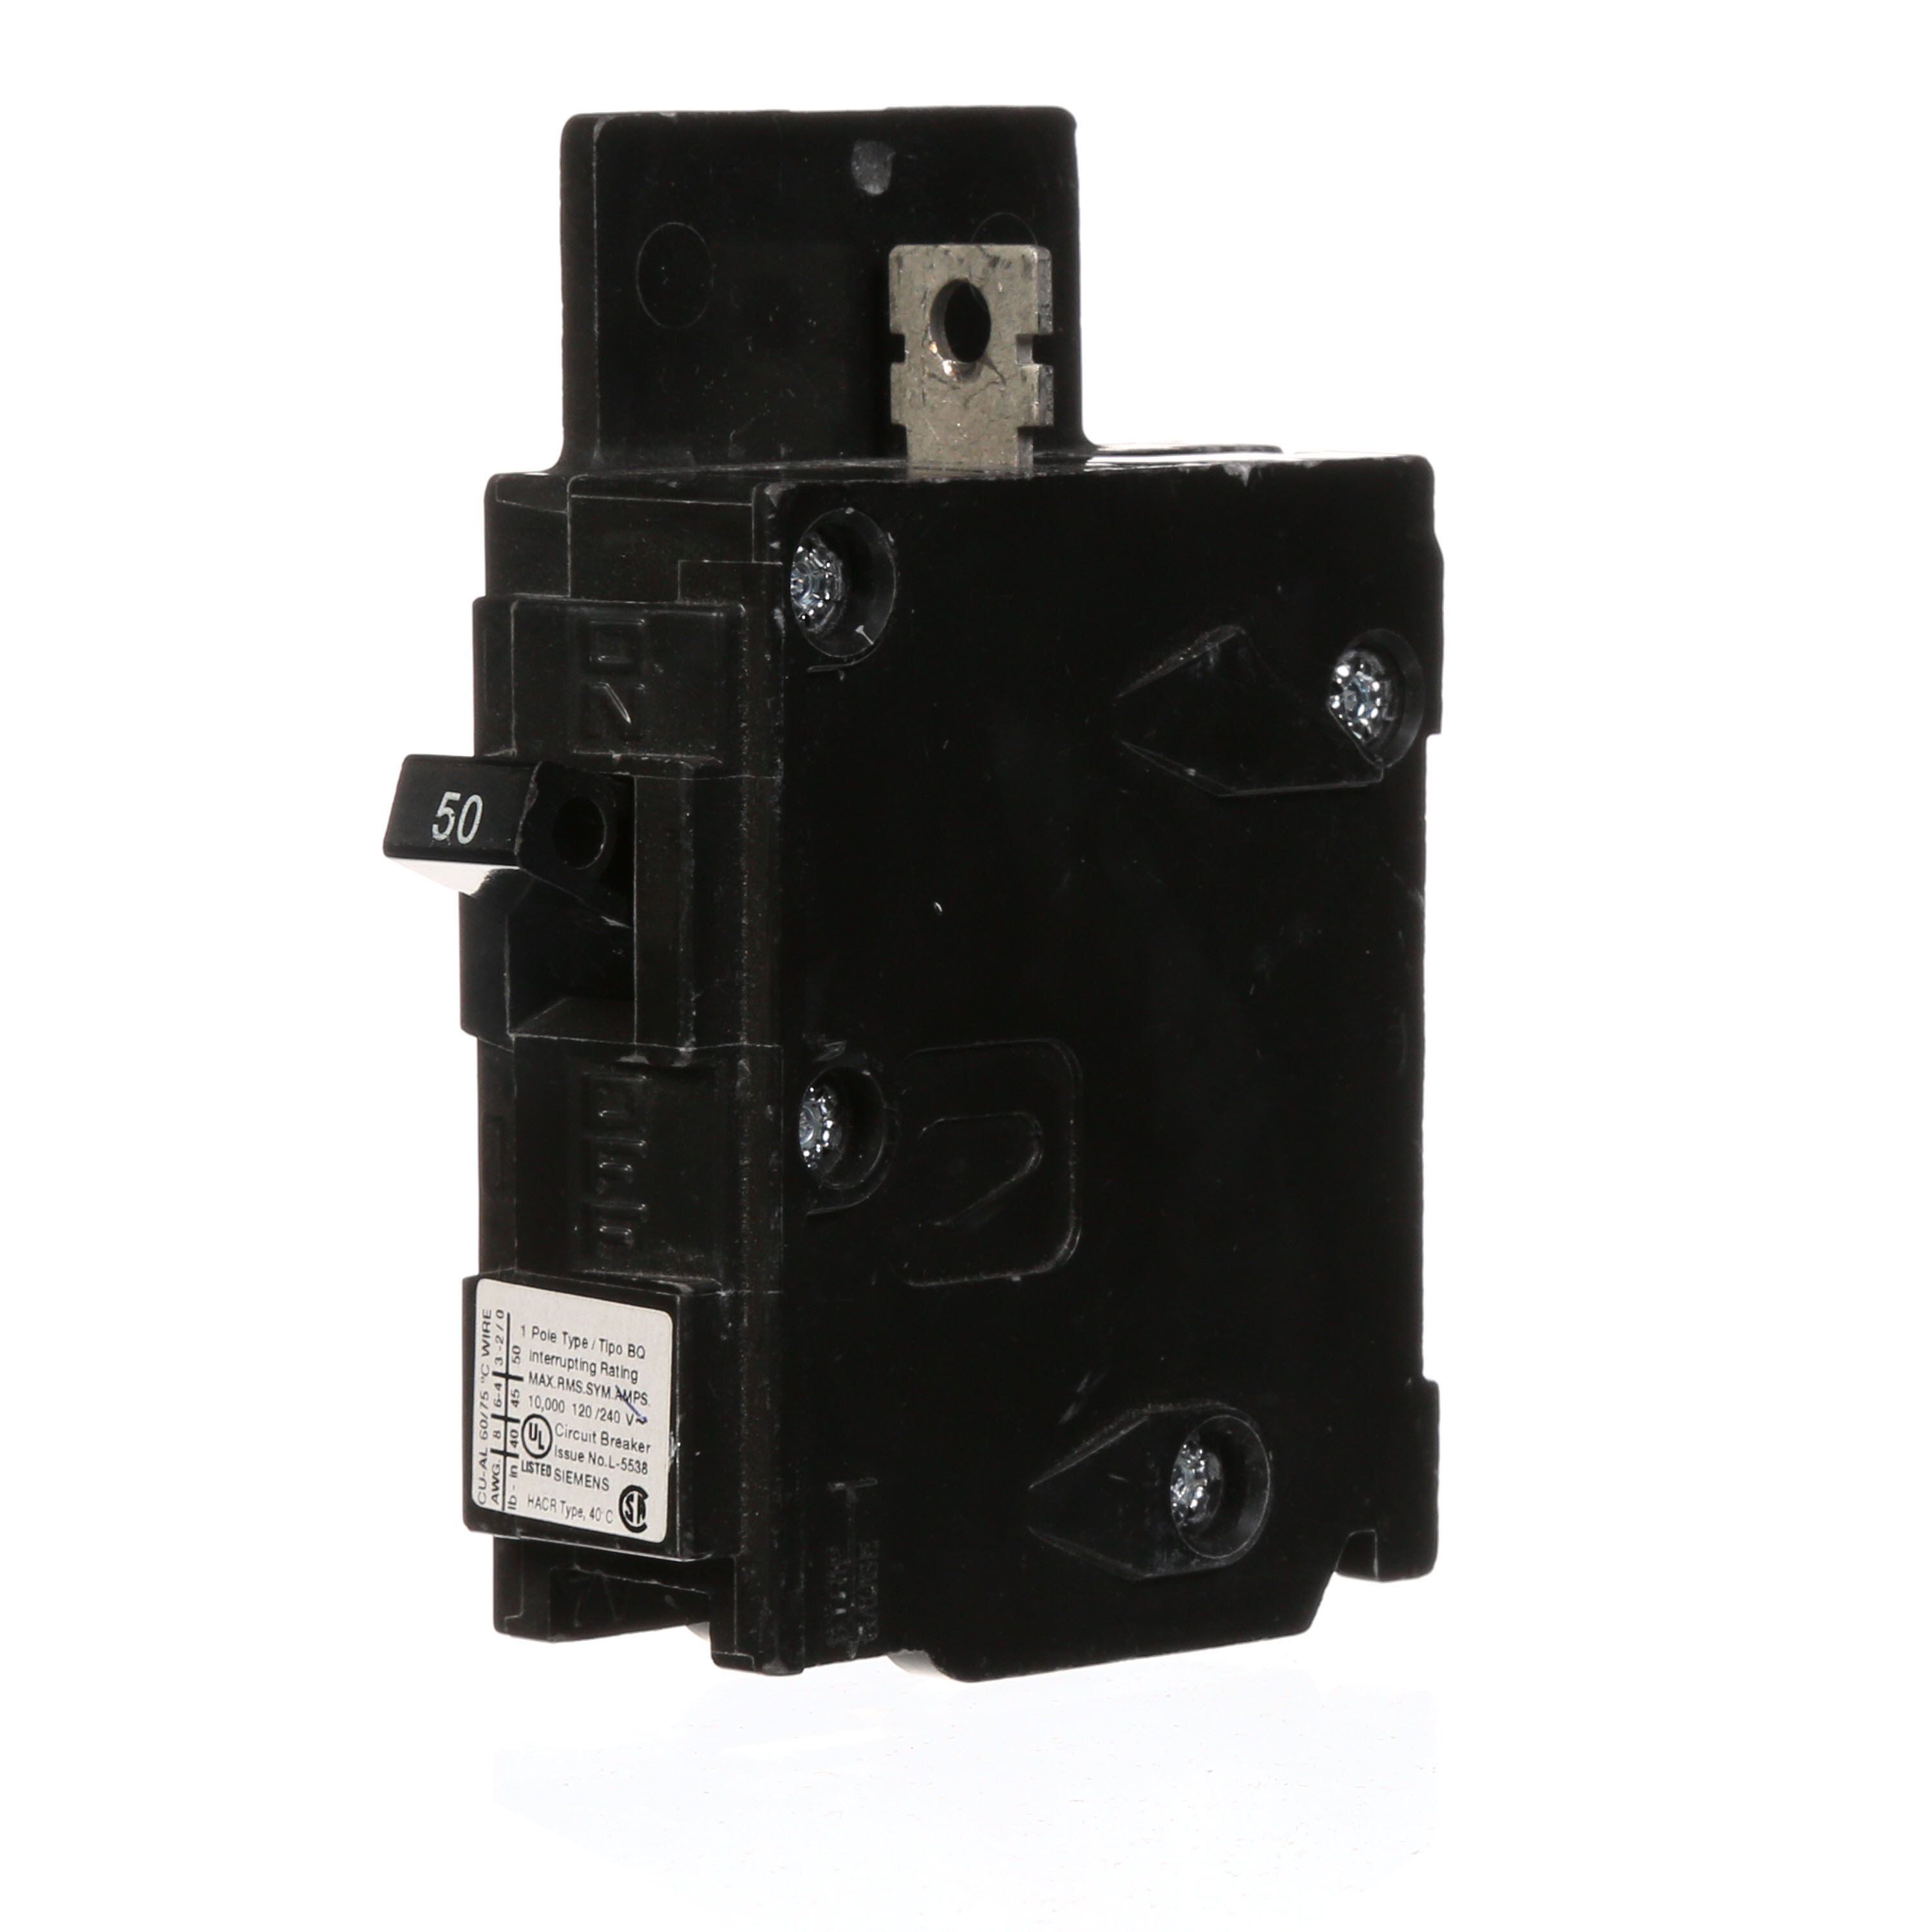 Siemens Low Voltage Molded Case Circuit Breakers General Purpose MCCBs are Circuit Protection Molded Case Circuit Breakers. 1-Pole circuit breaker type BQ. Rated 120V (050A) (AIR 10 kA). Special features Load side lugs are included.